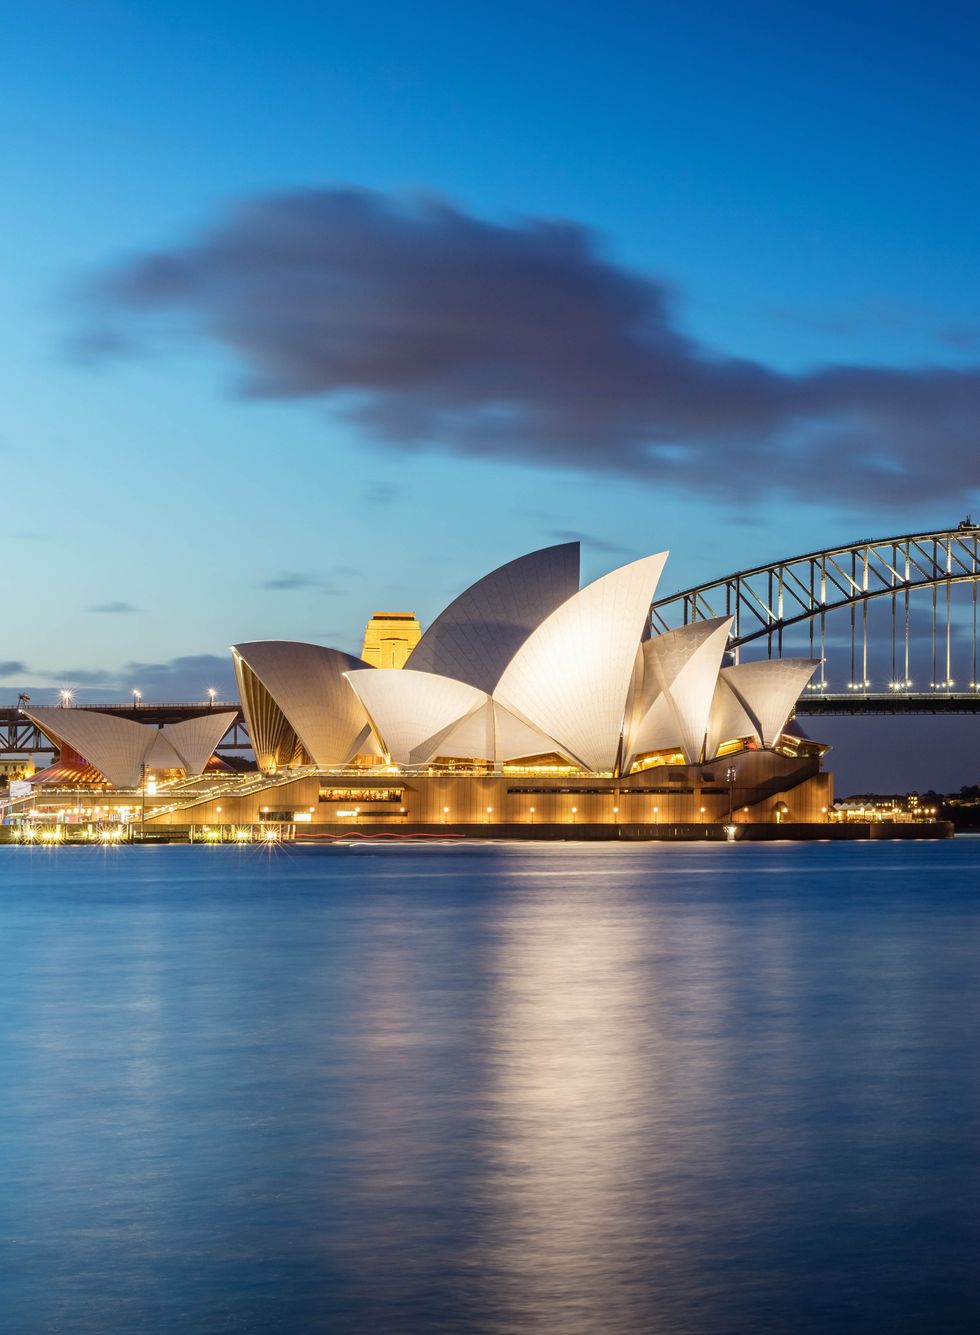 sydney skyline at twilight panorama of the sydney skyline the small sydney opera house on the left side, sydney harbor bridge in the middle twilight view sydney panorama sydney, australia canon 5dsr 50mpixel panorama